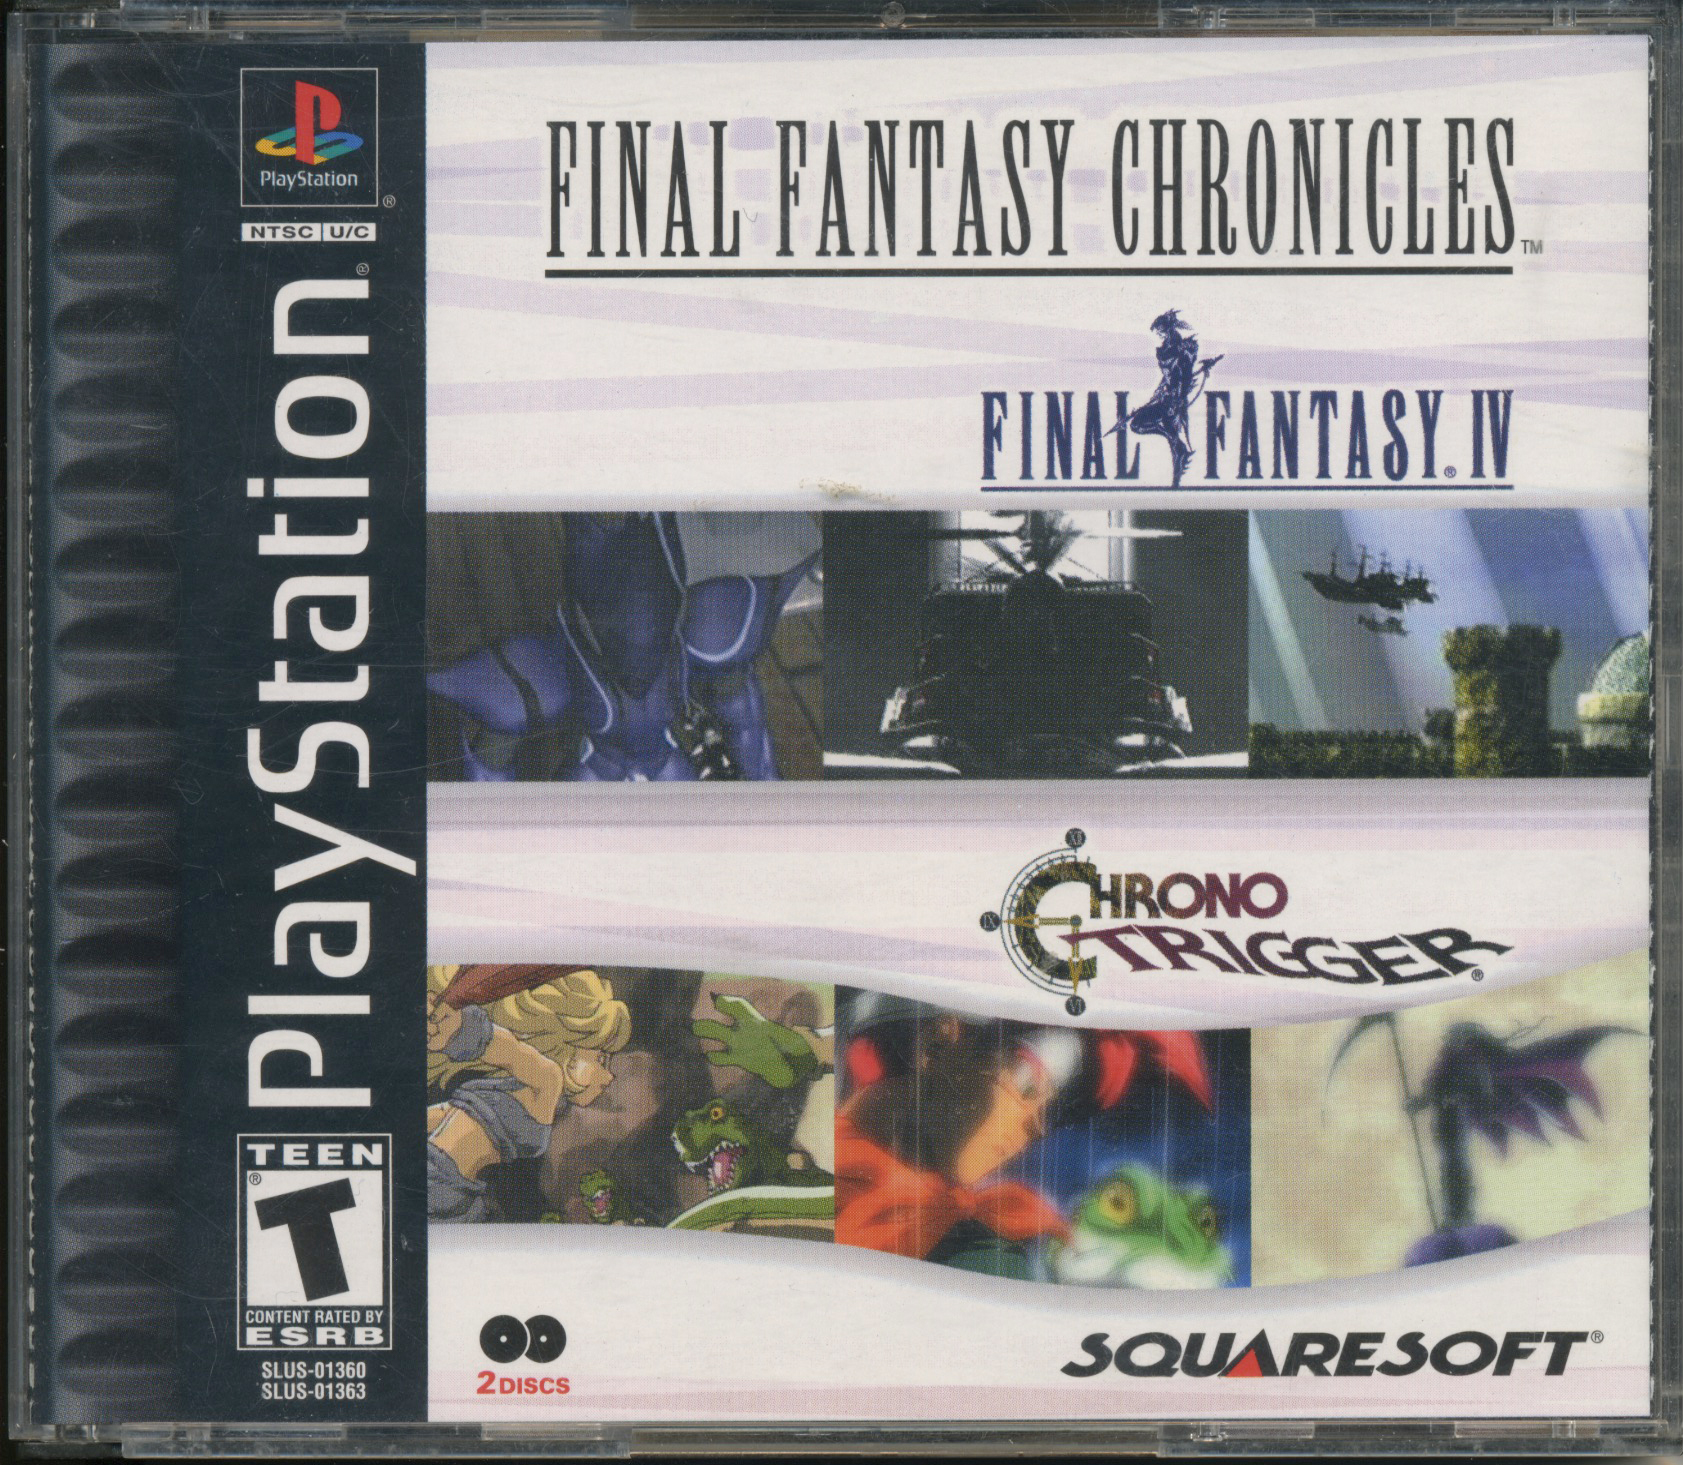 PDF) Chrono Cross Official Strategy Guide (Video Game Books) Full